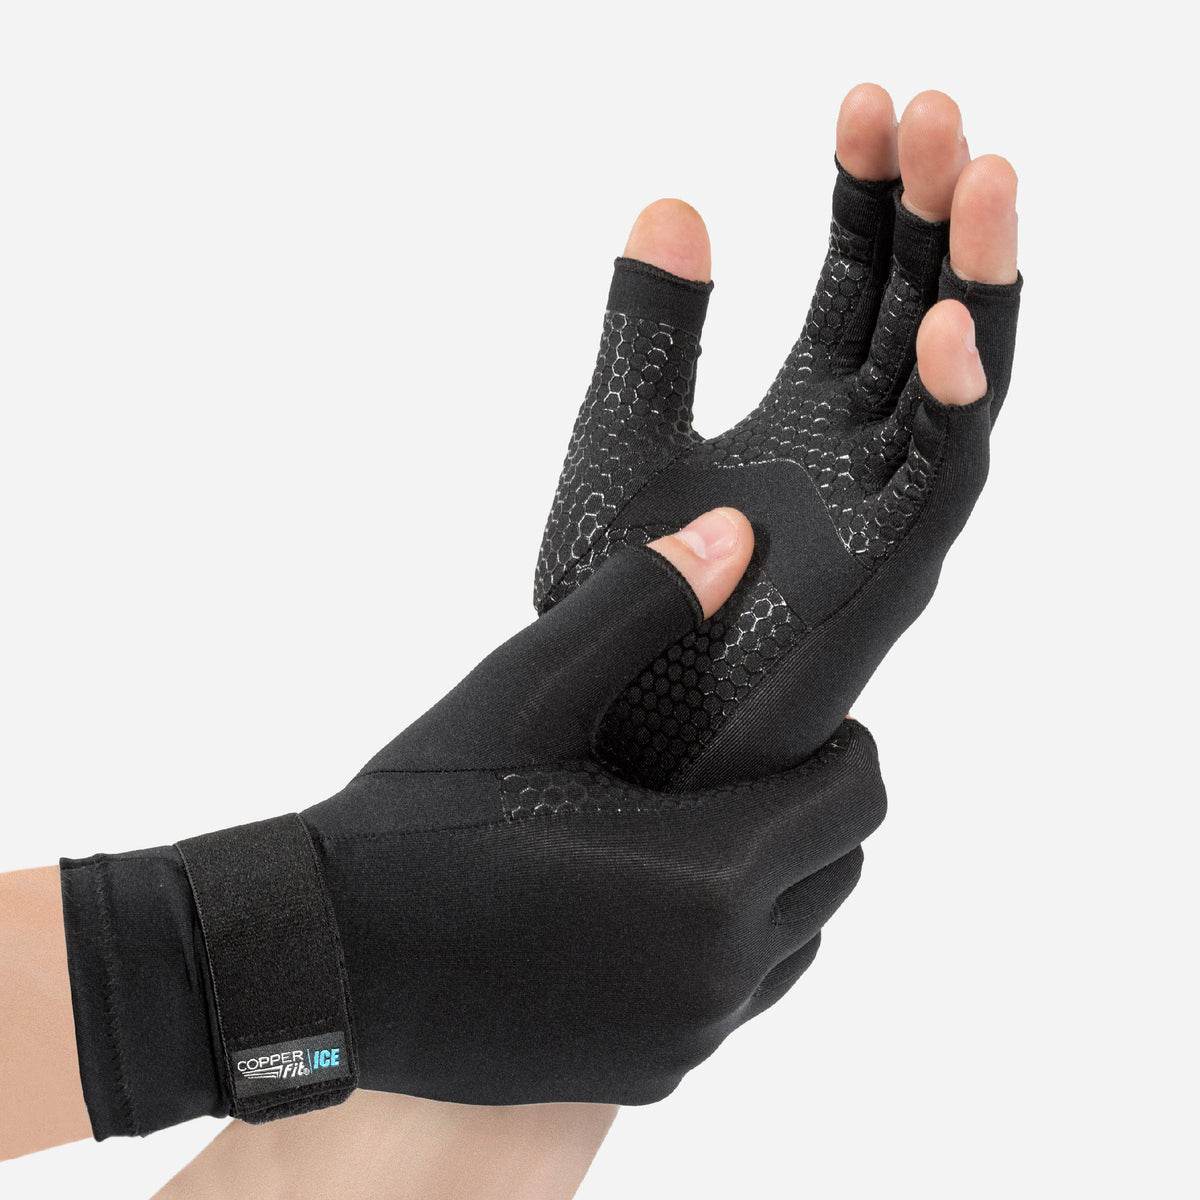 Menthol Infused Compression Gloves - All Day Relief for Arthritis